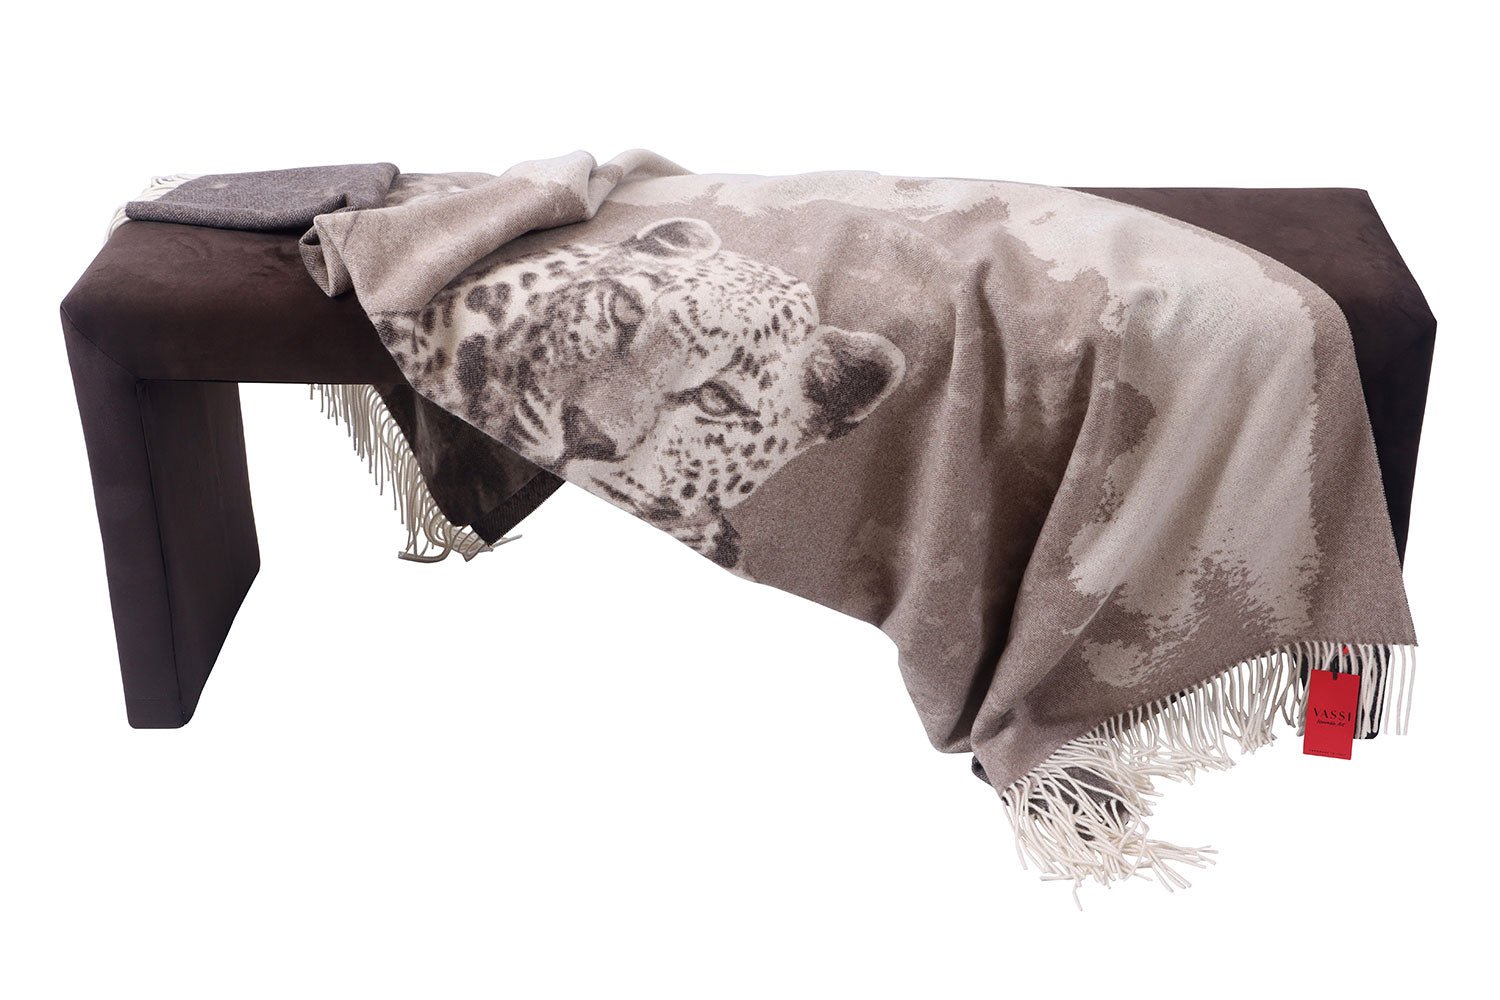 Pure Cashmere Throw -Taupe/Grey Leopard BLANKETS